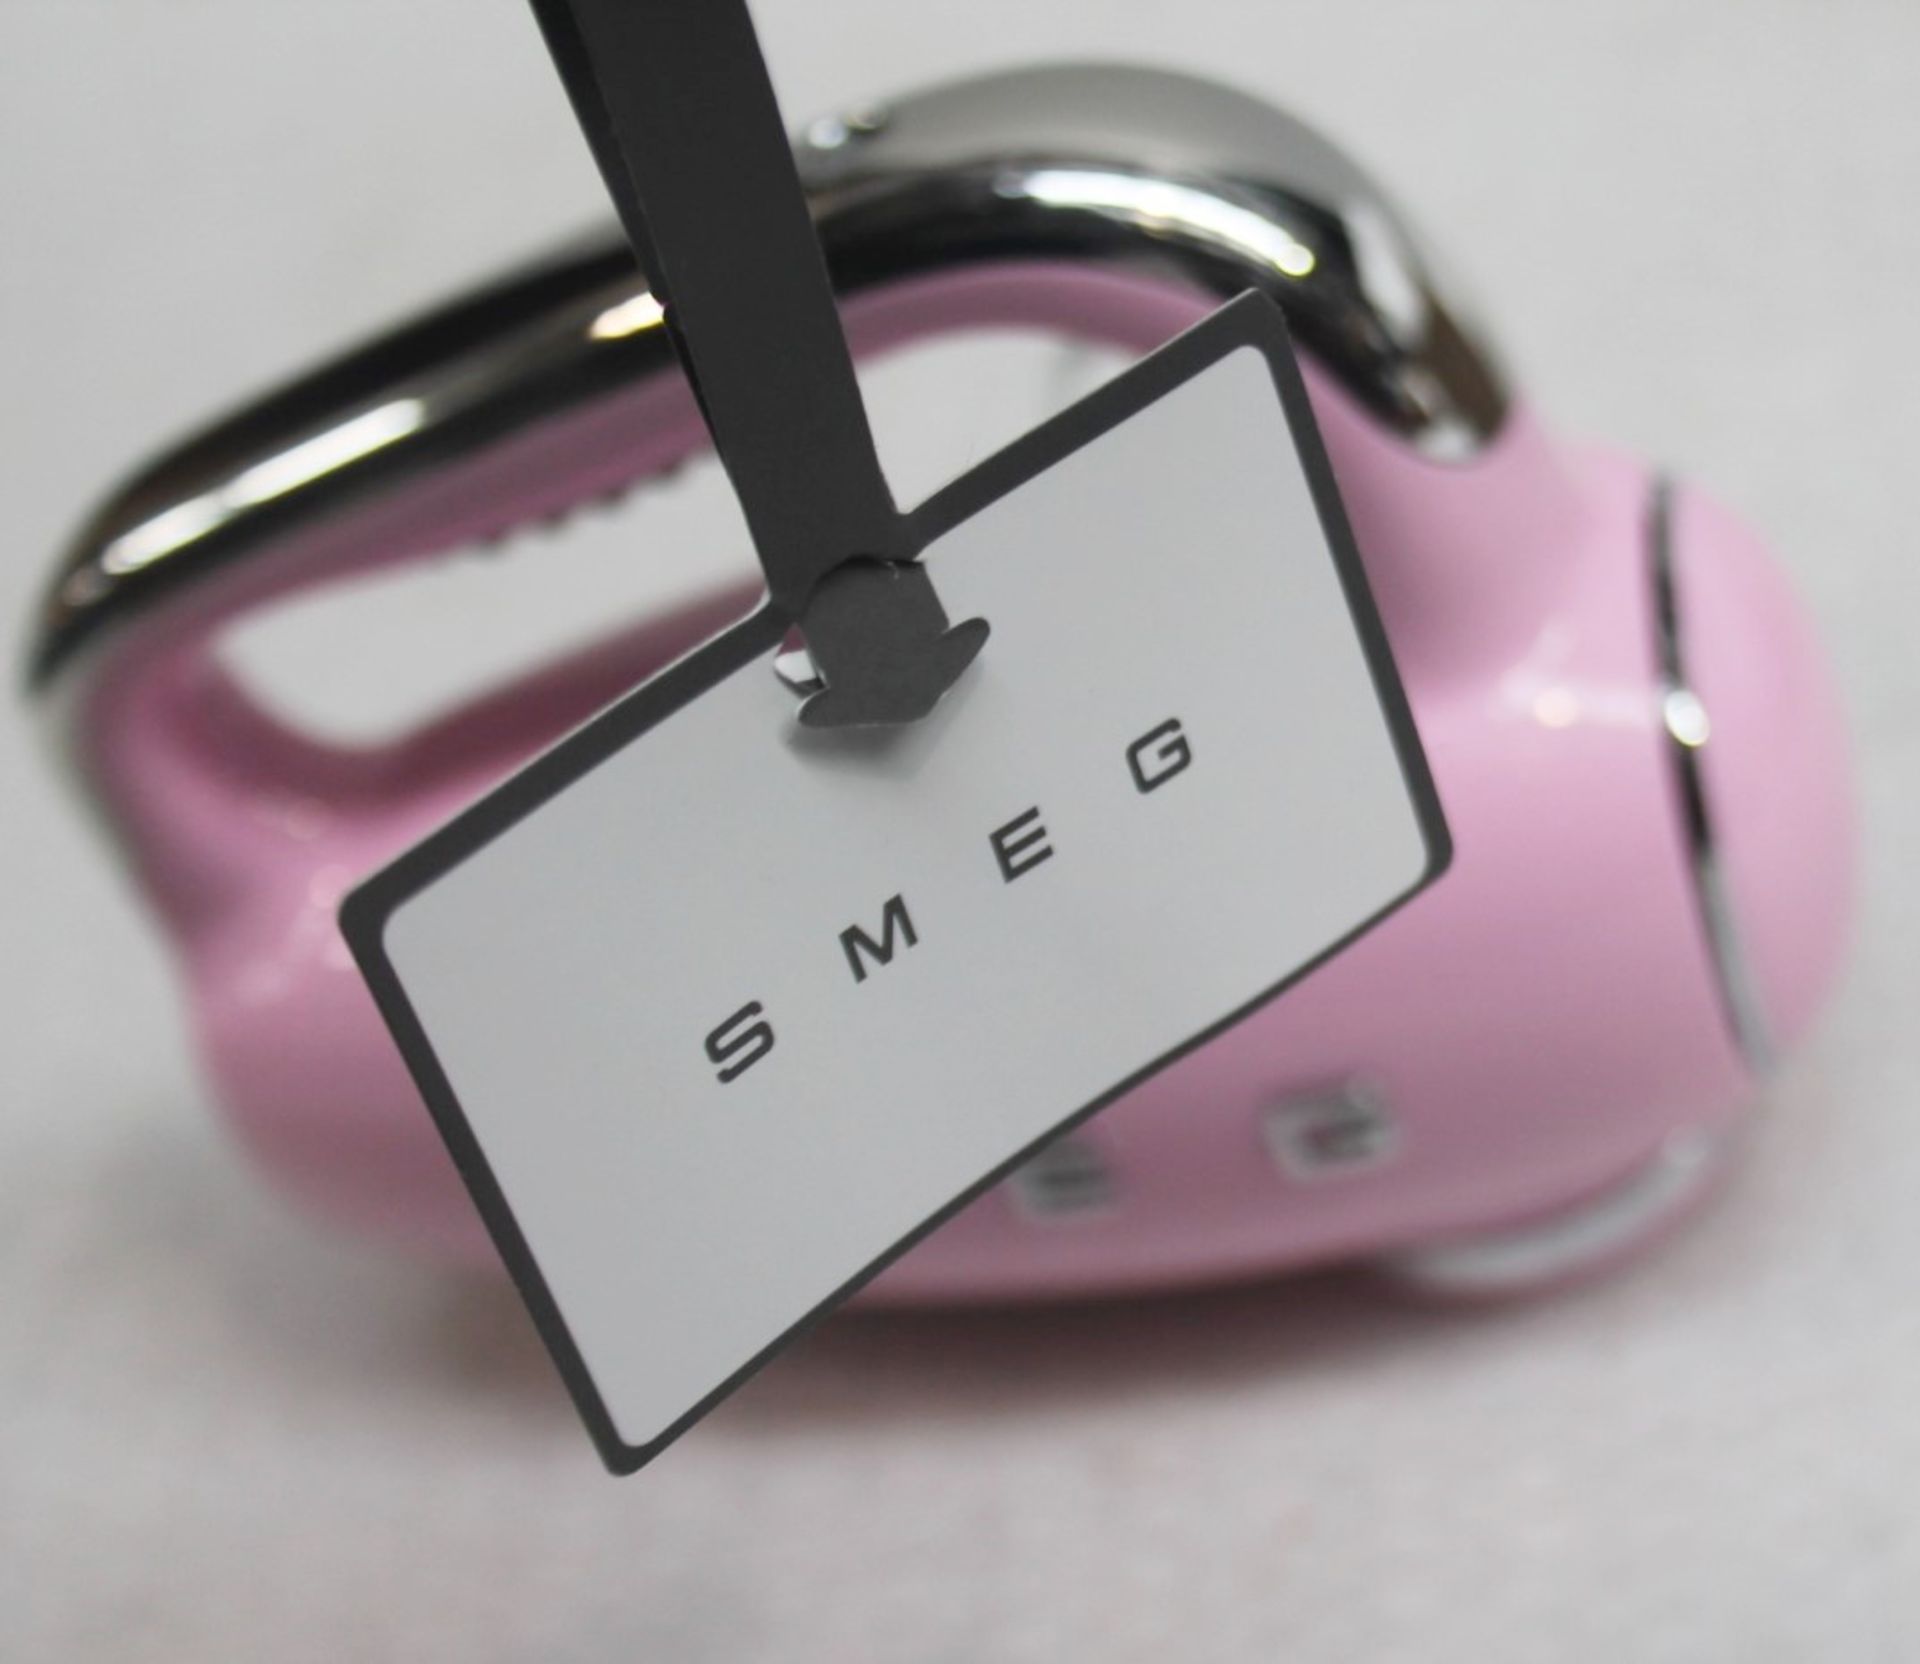 1 x SMEG 50's Retro Stand Hand Whisk Pink With Timer and 9 Power Levels - Original Price £149.00 - Image 7 of 15